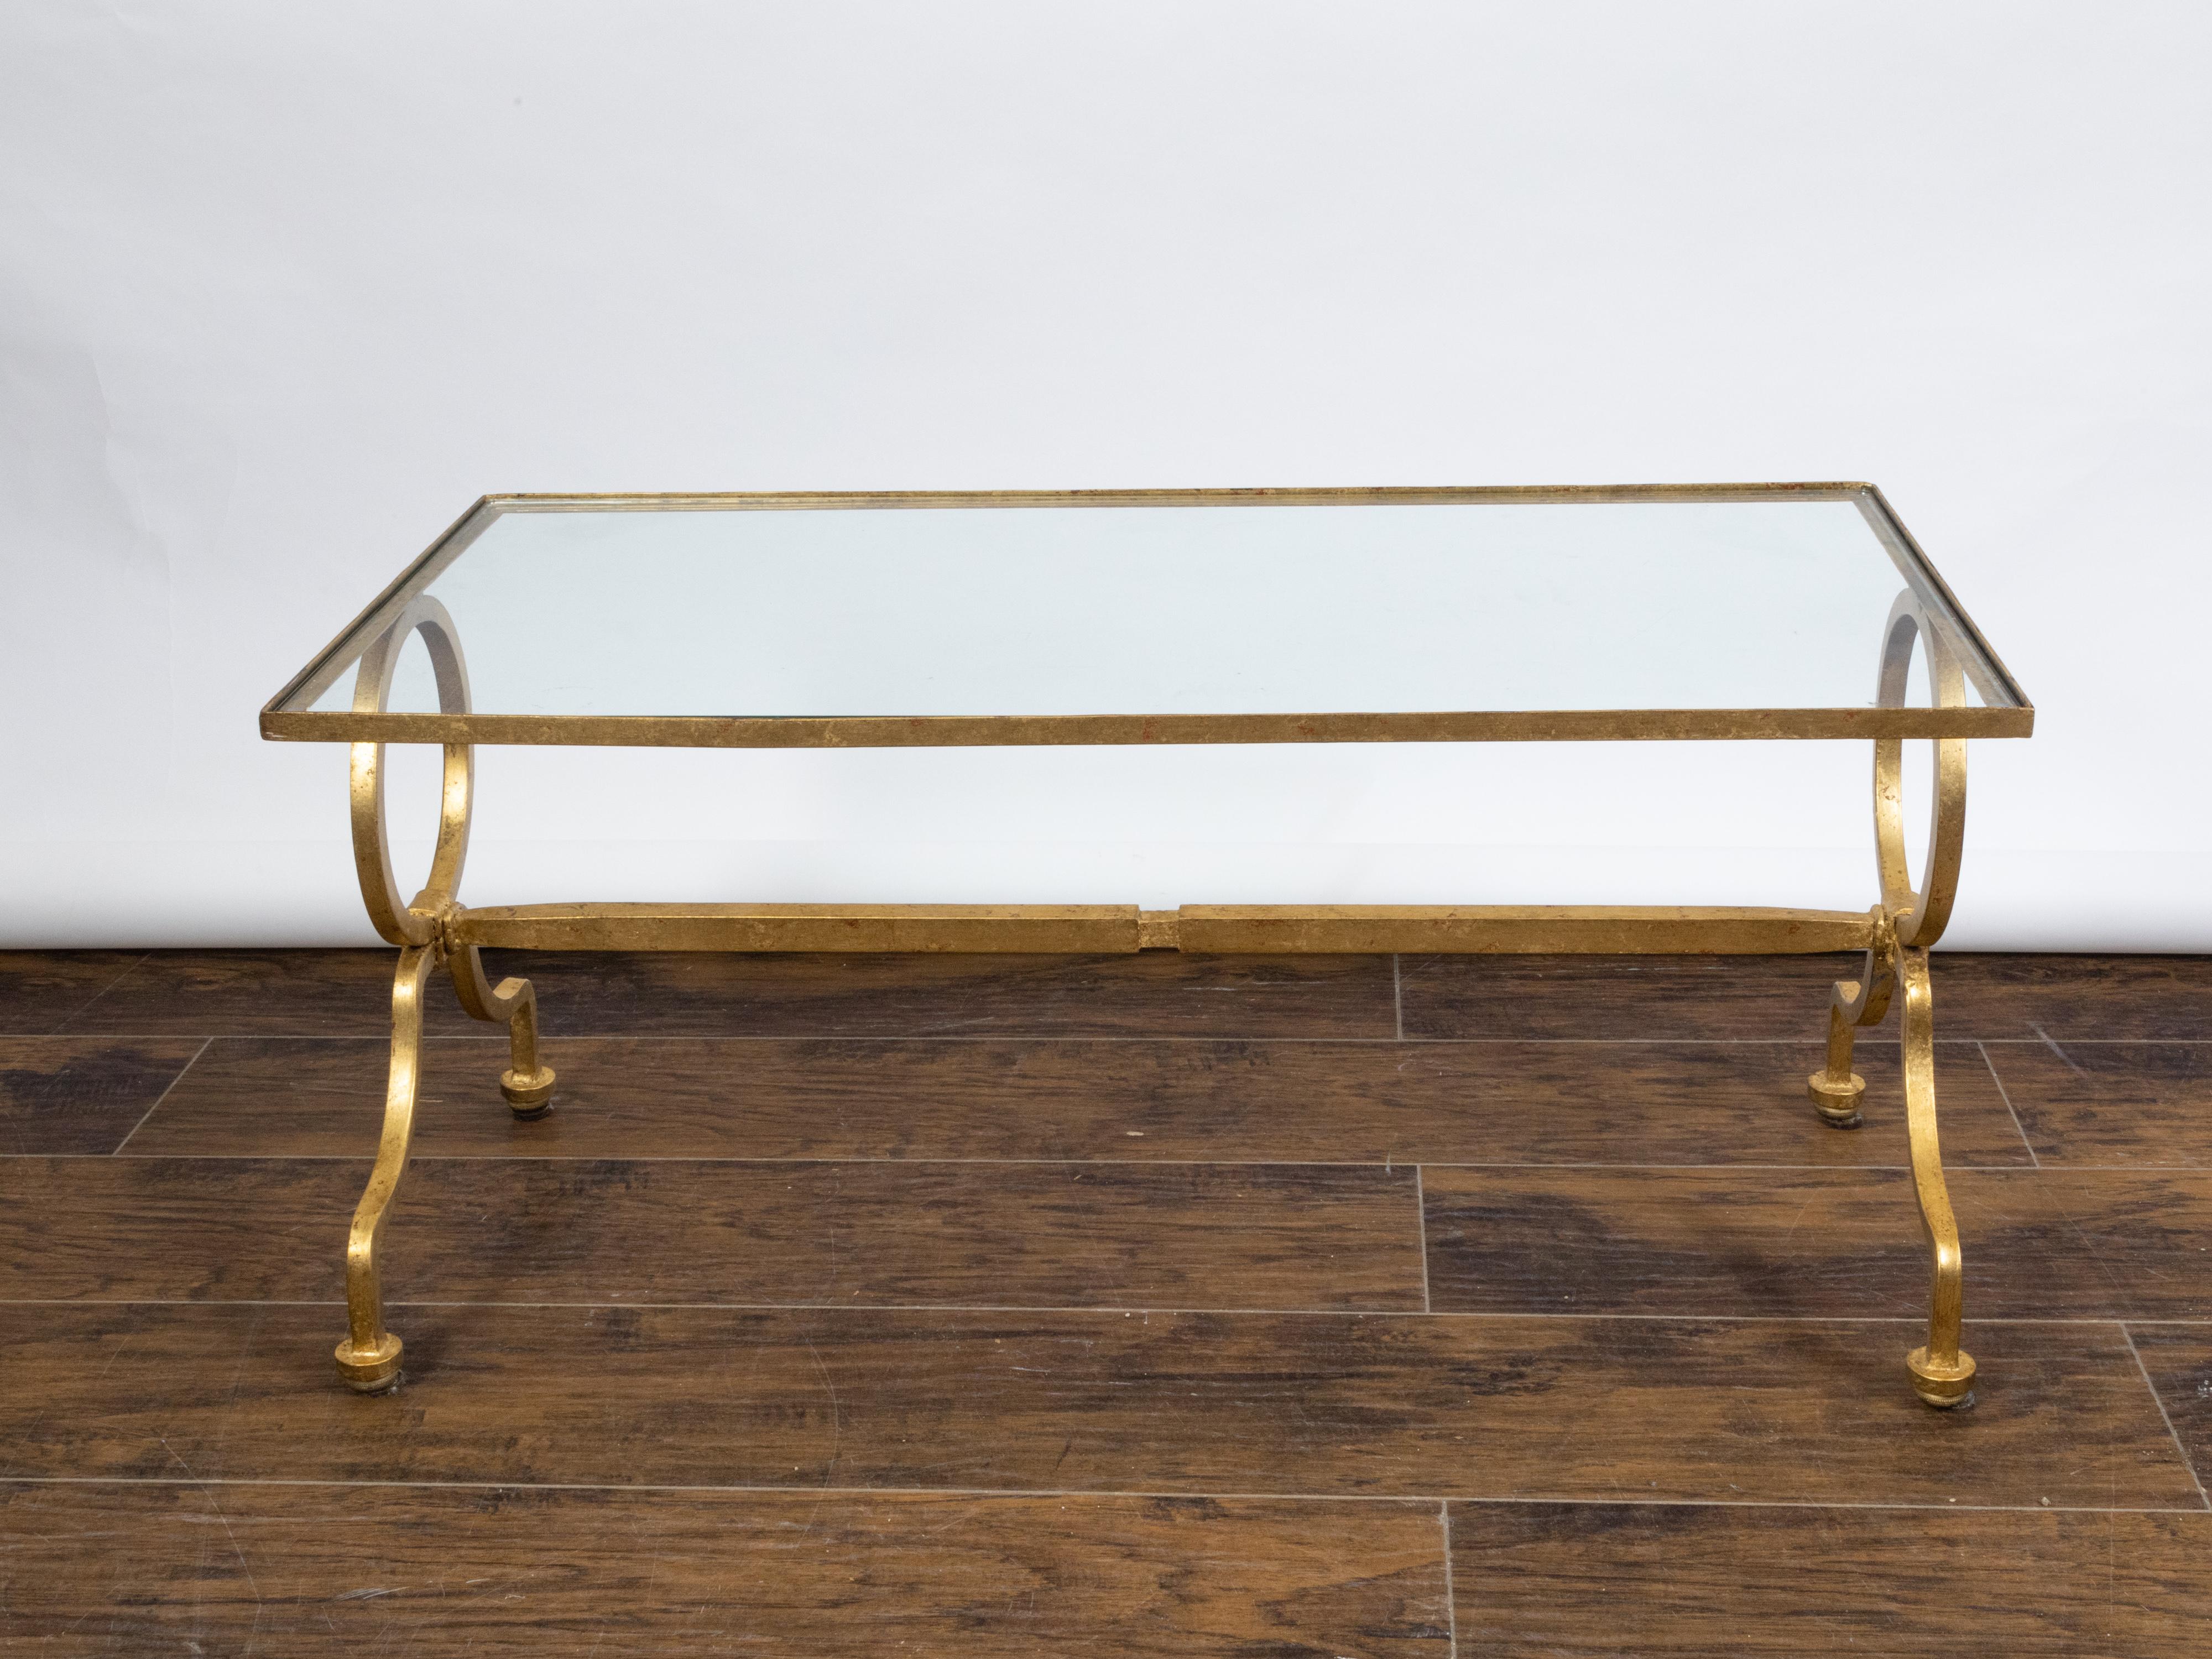 An Italian gilt iron coffee table from the mid 20th century, with glass top, rings and scrolling feet. Created in Italy during the midcentury period, this gilt iron coffee table features a rectangular glass top sitting above two large rings resting